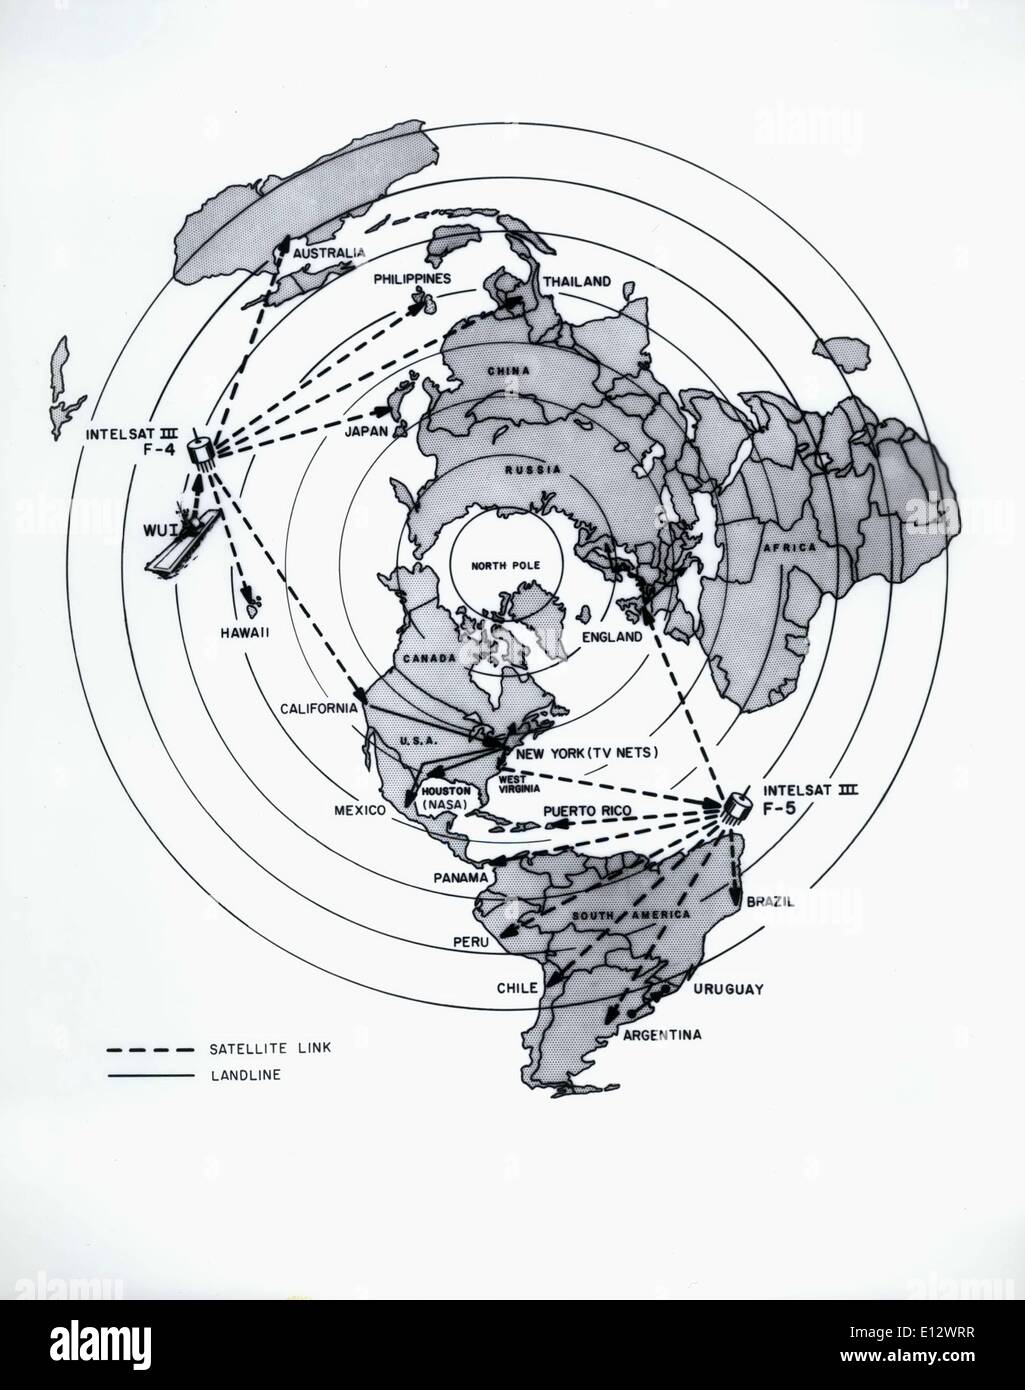 Feb. 26, 2012 - An estimated 500 million viewers in 49 countries will see the Apollo 11 splashdown, July 24, on television. Through a complex network of satellites, ground stations and landlines shown on the polar projection of the globe, the ''live'' colorcast travels along multiple paths totalling about one-third of a million miles to reach the 1000 television stations expected to carry the event Stock Photo